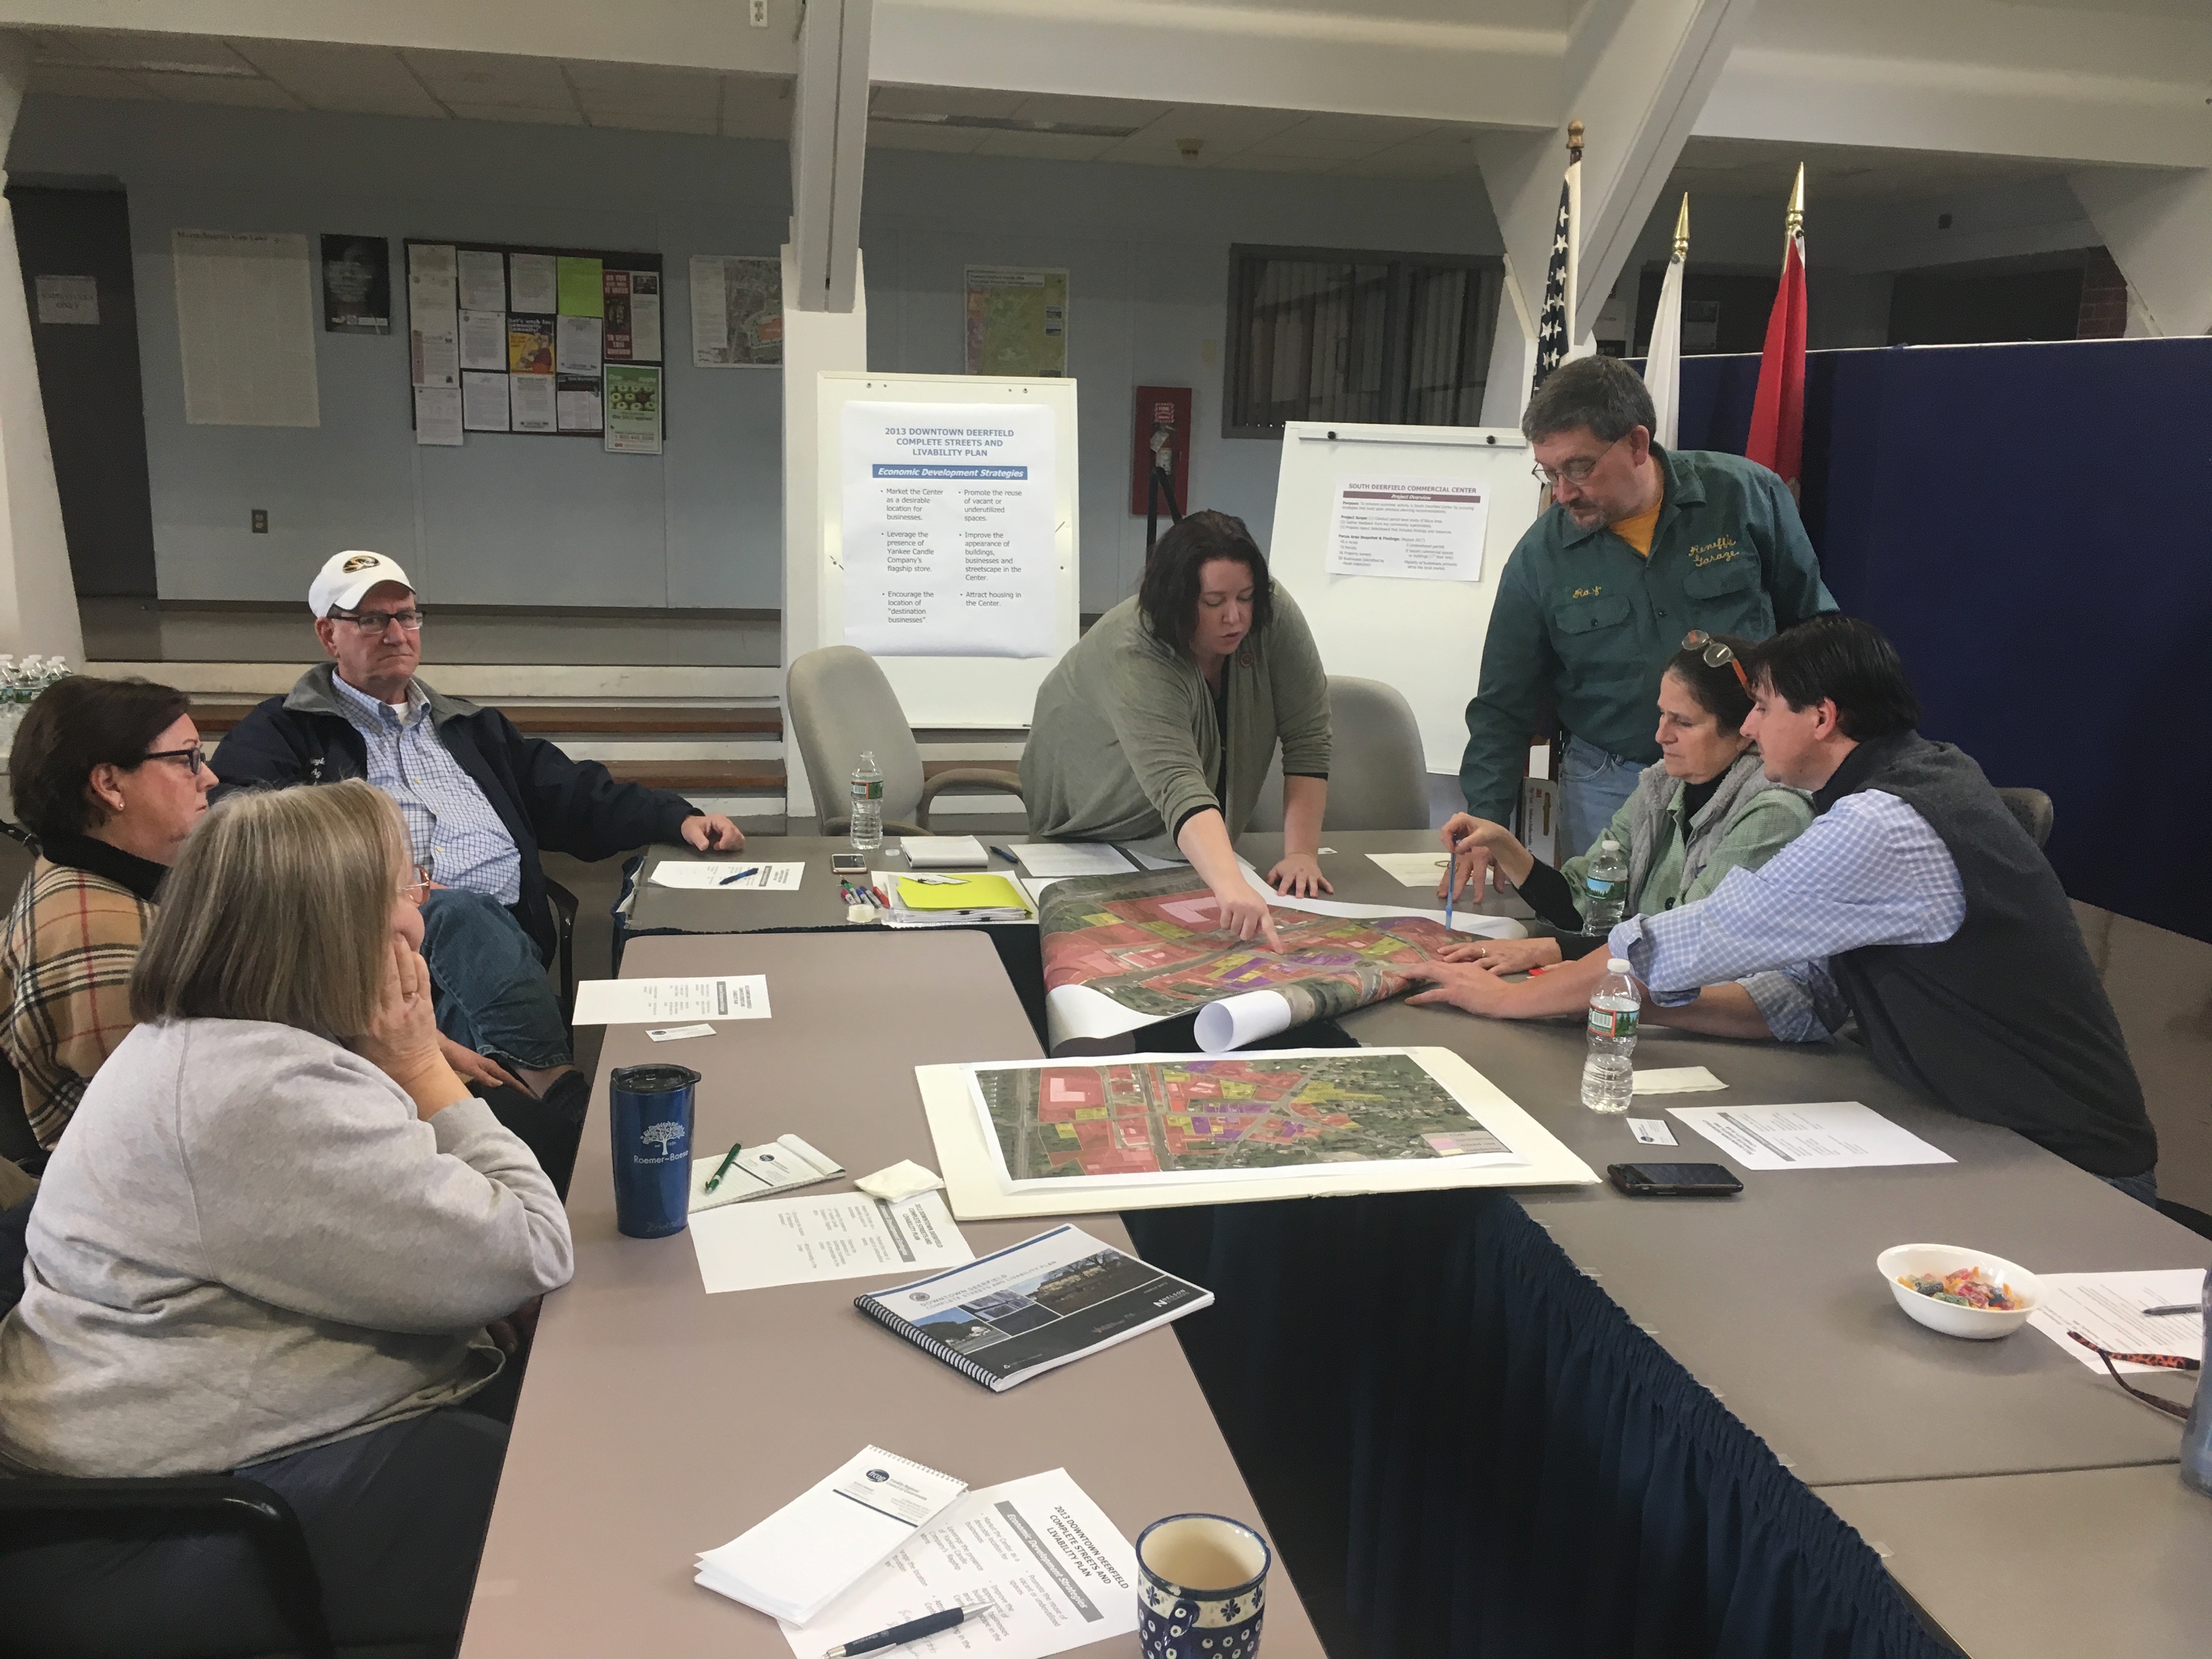 Local landlords and citizens share ideas at a recent meeting in Town Hall about how to improve South Deerfield. Max Hartshorne photo.